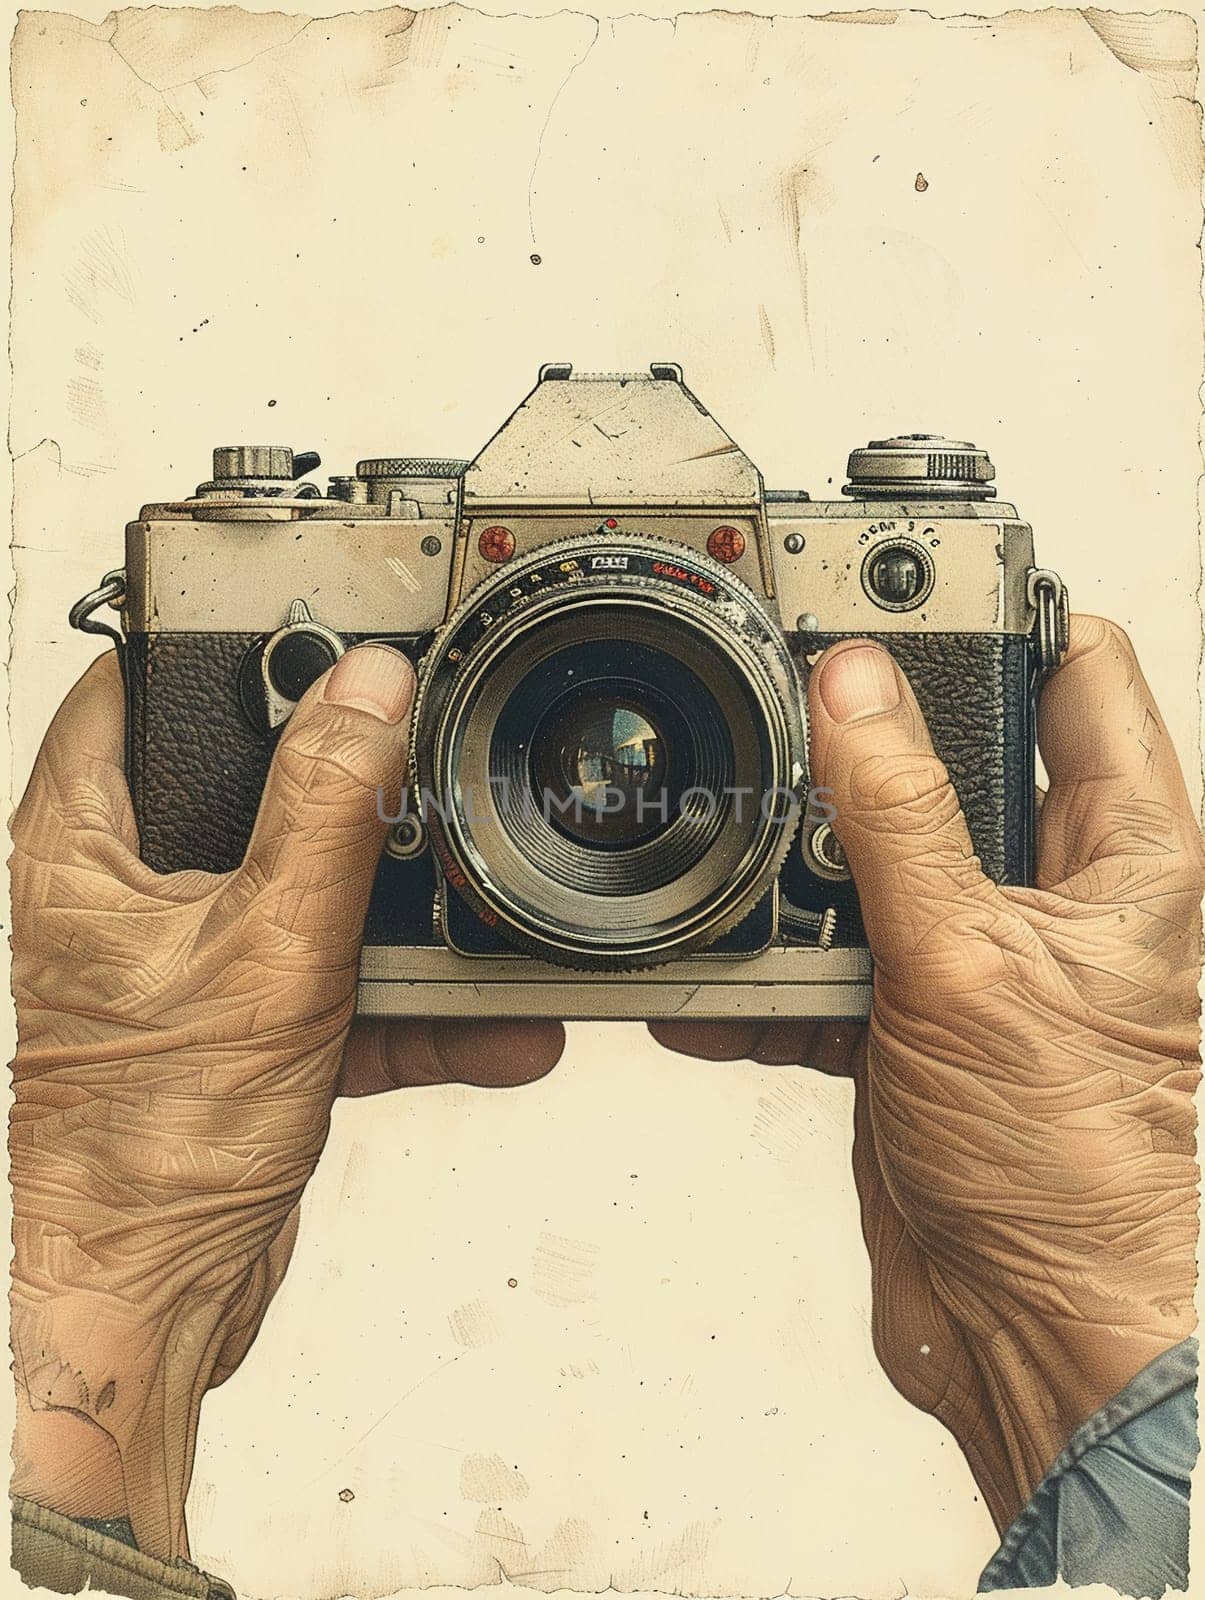 Hands holding a vintage camera, illustrated in a sepia-toned style evoking nostalgia and history.